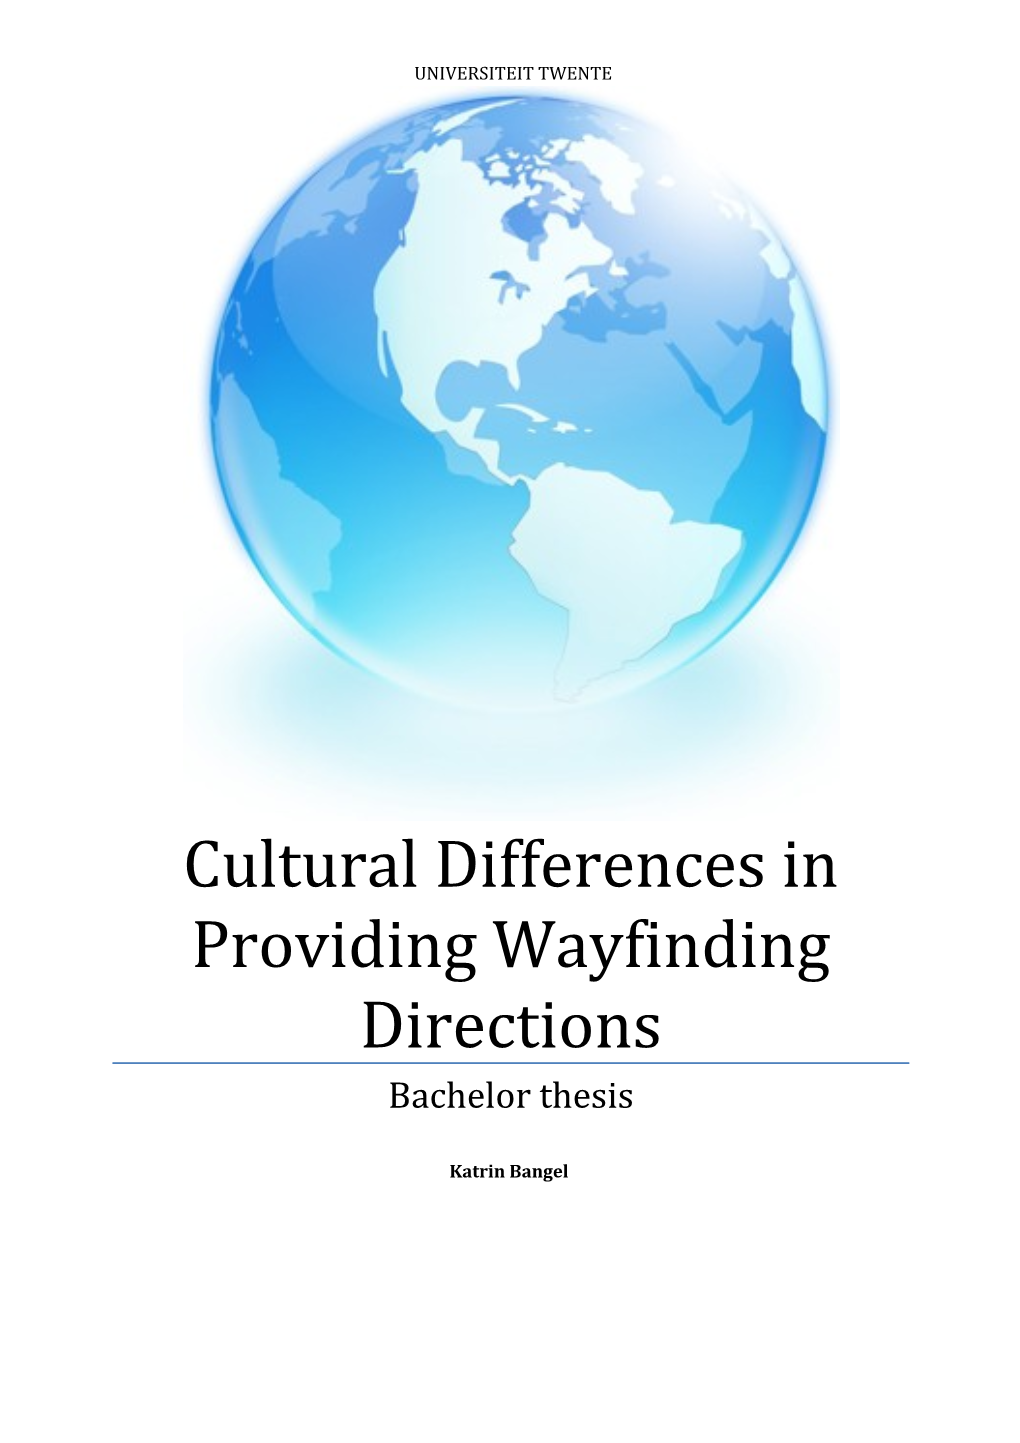 Cultural Differences in Providing Wayfinding Directions